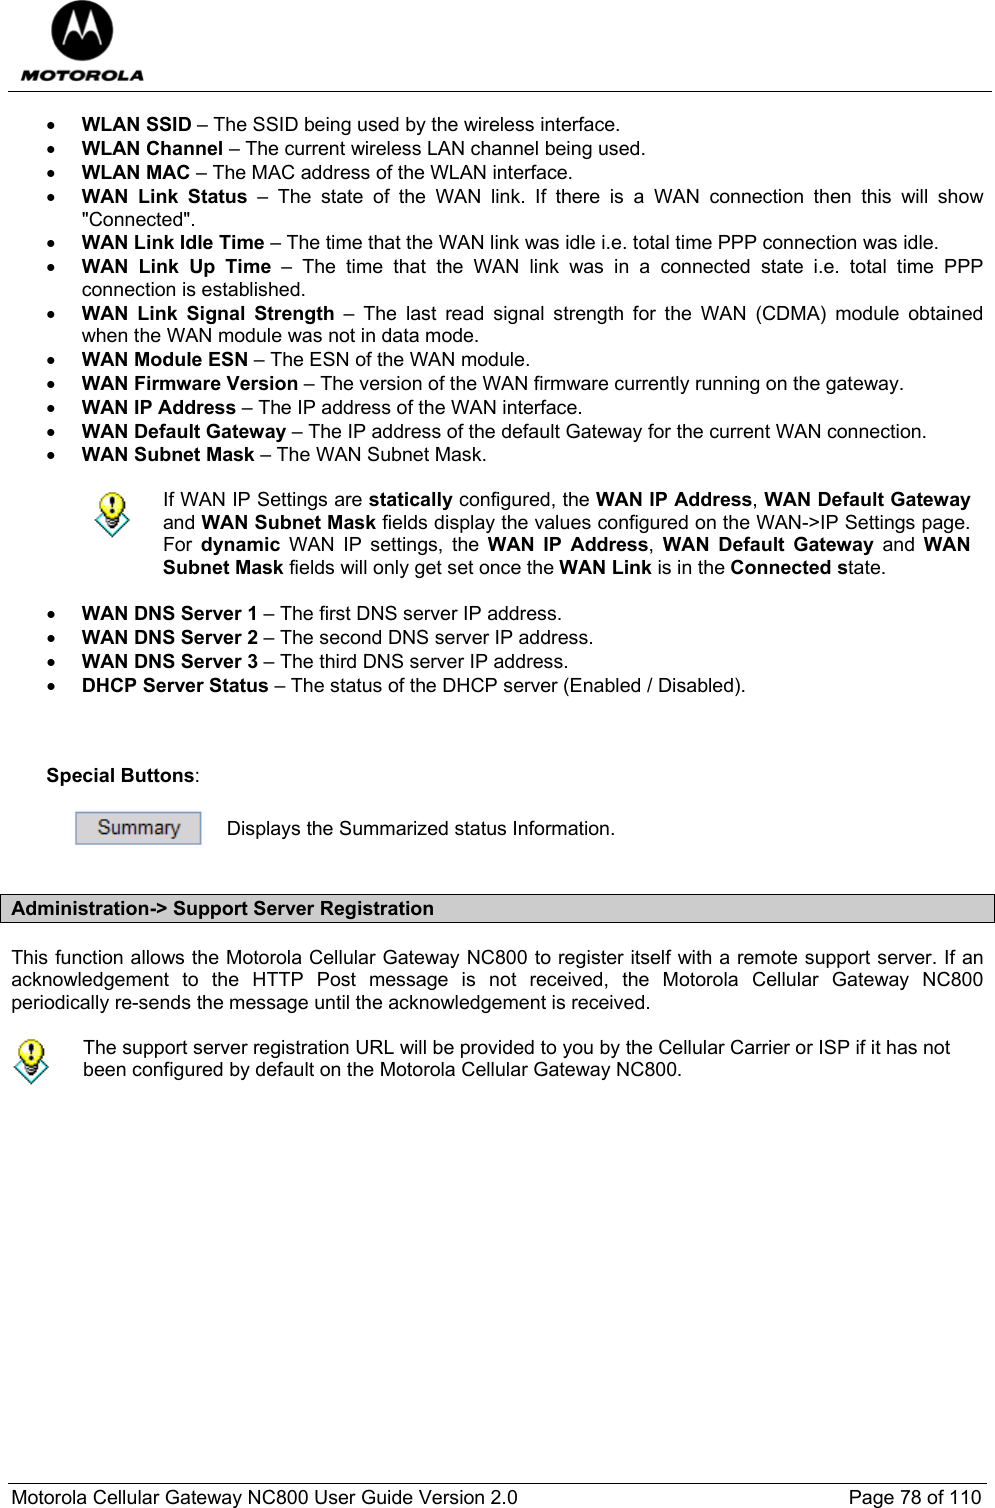  Motorola Cellular Gateway NC800 User Guide Version 2.0     Page 78 of 110  • WLAN SSID – The SSID being used by the wireless interface. • WLAN Channel – The current wireless LAN channel being used. • WLAN MAC – The MAC address of the WLAN interface. • WAN Link Status – The state of the WAN link. If there is a WAN connection then this will show &quot;Connected&quot;. • WAN Link Idle Time – The time that the WAN link was idle i.e. total time PPP connection was idle. • WAN Link Up Time – The time that the WAN link was in a connected state i.e. total time PPP connection is established. • WAN Link Signal Strength – The last read signal strength for the WAN (CDMA) module obtained when the WAN module was not in data mode. • WAN Module ESN – The ESN of the WAN module. • WAN Firmware Version – The version of the WAN firmware currently running on the gateway. • WAN IP Address – The IP address of the WAN interface.  • WAN Default Gateway – The IP address of the default Gateway for the current WAN connection. • WAN Subnet Mask – The WAN Subnet Mask.   If WAN IP Settings are statically configured, the WAN IP Address, WAN Default Gateway and WAN Subnet Mask fields display the values configured on the WAN-&gt;IP Settings page. For  dynamic WAN IP settings, the WAN IP Address,  WAN Default Gateway and WAN Subnet Mask fields will only get set once the WAN Link is in the Connected state.  • WAN DNS Server 1 – The first DNS server IP address. • WAN DNS Server 2 – The second DNS server IP address. • WAN DNS Server 3 – The third DNS server IP address. • DHCP Server Status – The status of the DHCP server (Enabled / Disabled).    Special Buttons:   Displays the Summarized status Information.  Administration-&gt; Support Server Registration This function allows the Motorola Cellular Gateway NC800 to register itself with a remote support server. If an acknowledgement to the HTTP Post message is not received, the Motorola Cellular Gateway NC800 periodically re-sends the message until the acknowledgement is received.   The support server registration URL will be provided to you by the Cellular Carrier or ISP if it has not been configured by default on the Motorola Cellular Gateway NC800.  